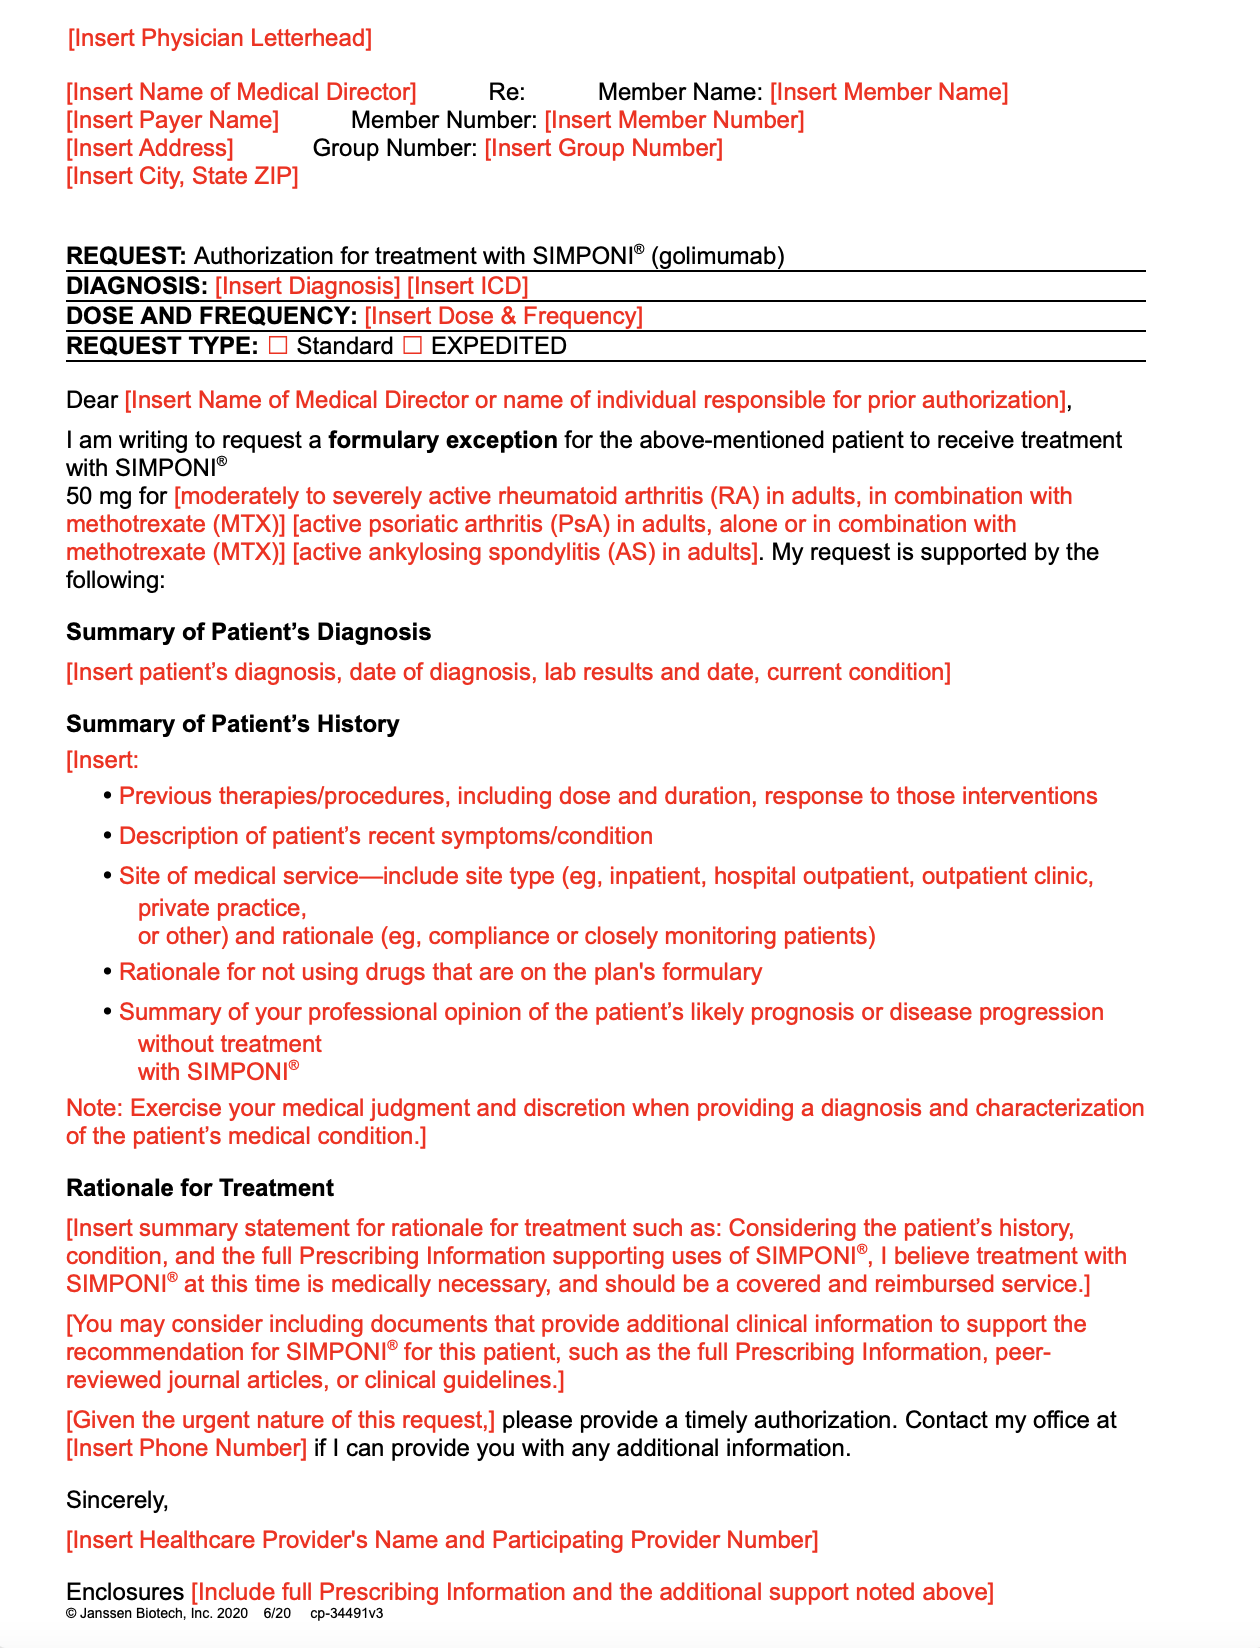 SIMPONI® Letter of Exception (Rheumatology)